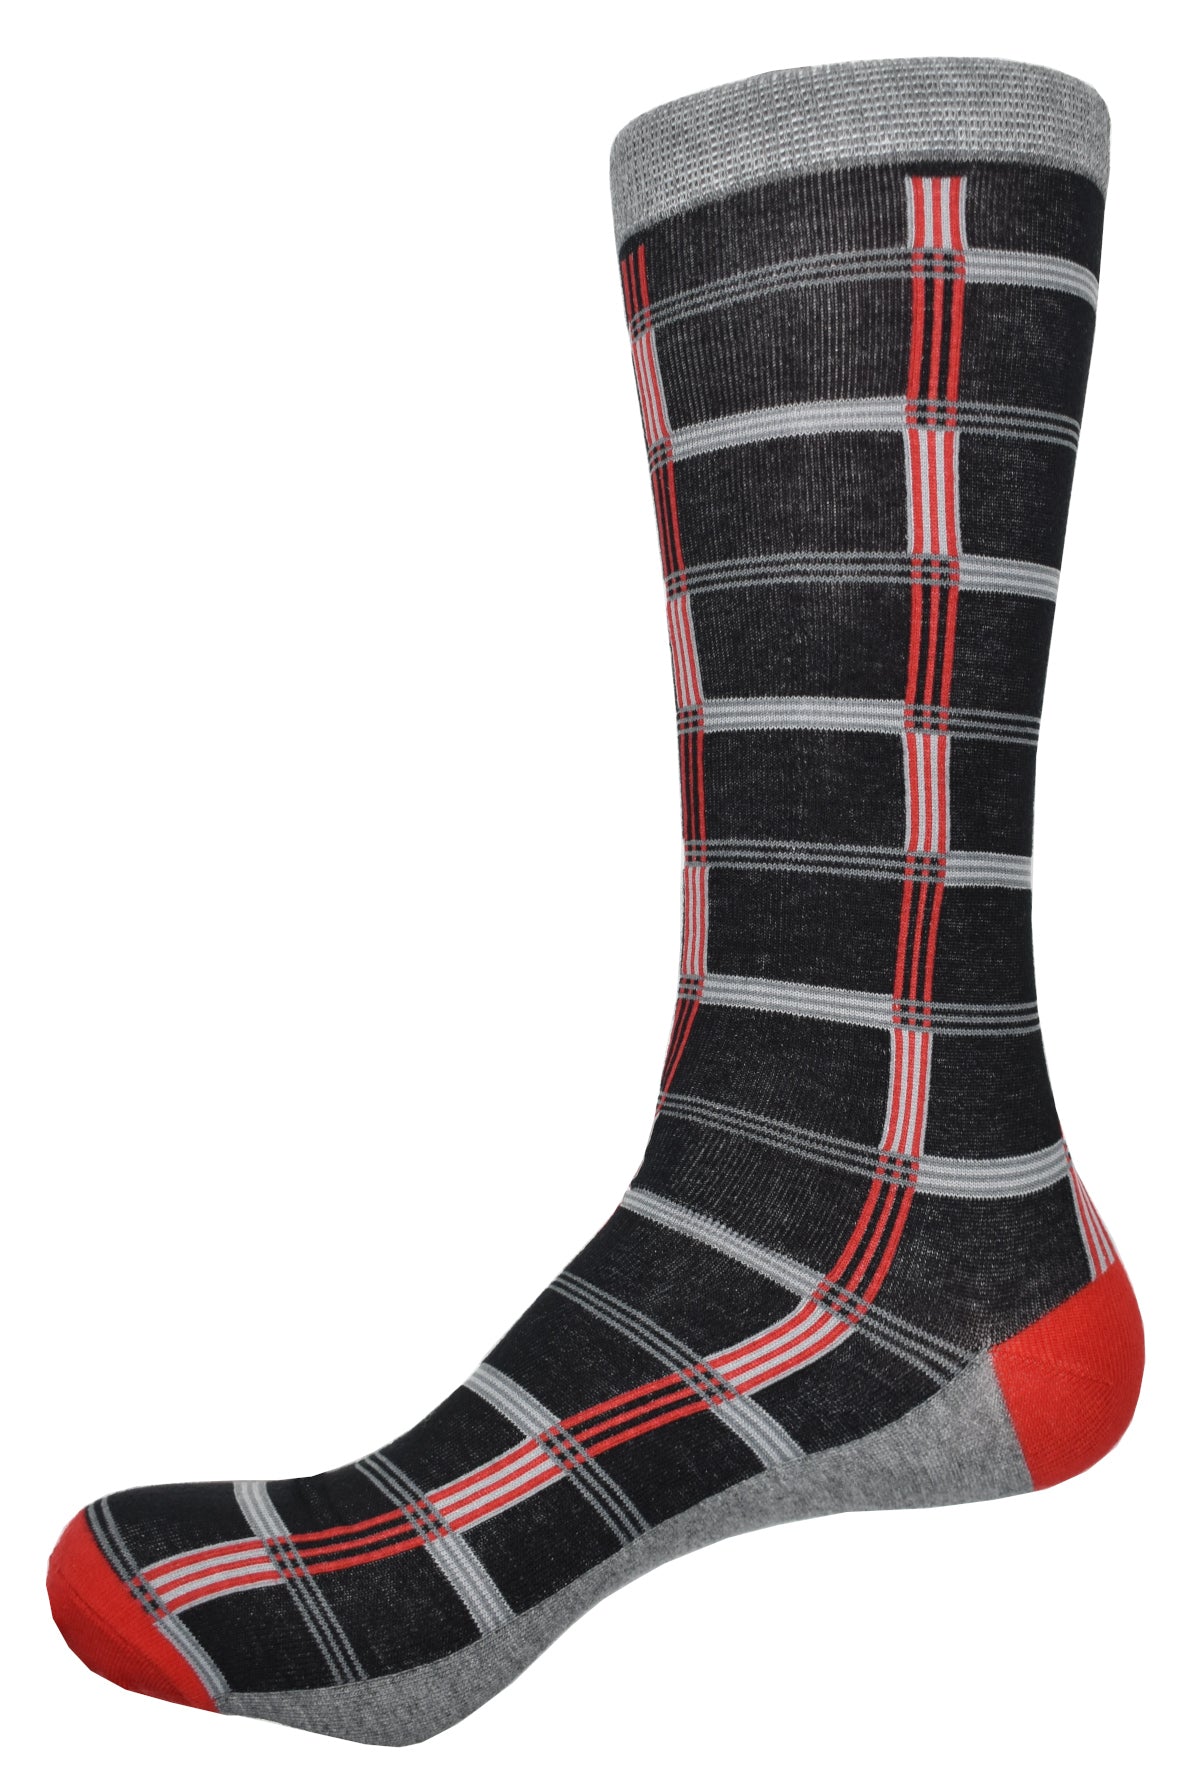 These high-quality ZJ8063 Racetrack Windowpane Socks add a modern twist to your outfit. Crafted from a solid black, mercerized cotton fabric with a bold red and gray windowpane pattern, these socks will elevate any look. Marcello Socks.